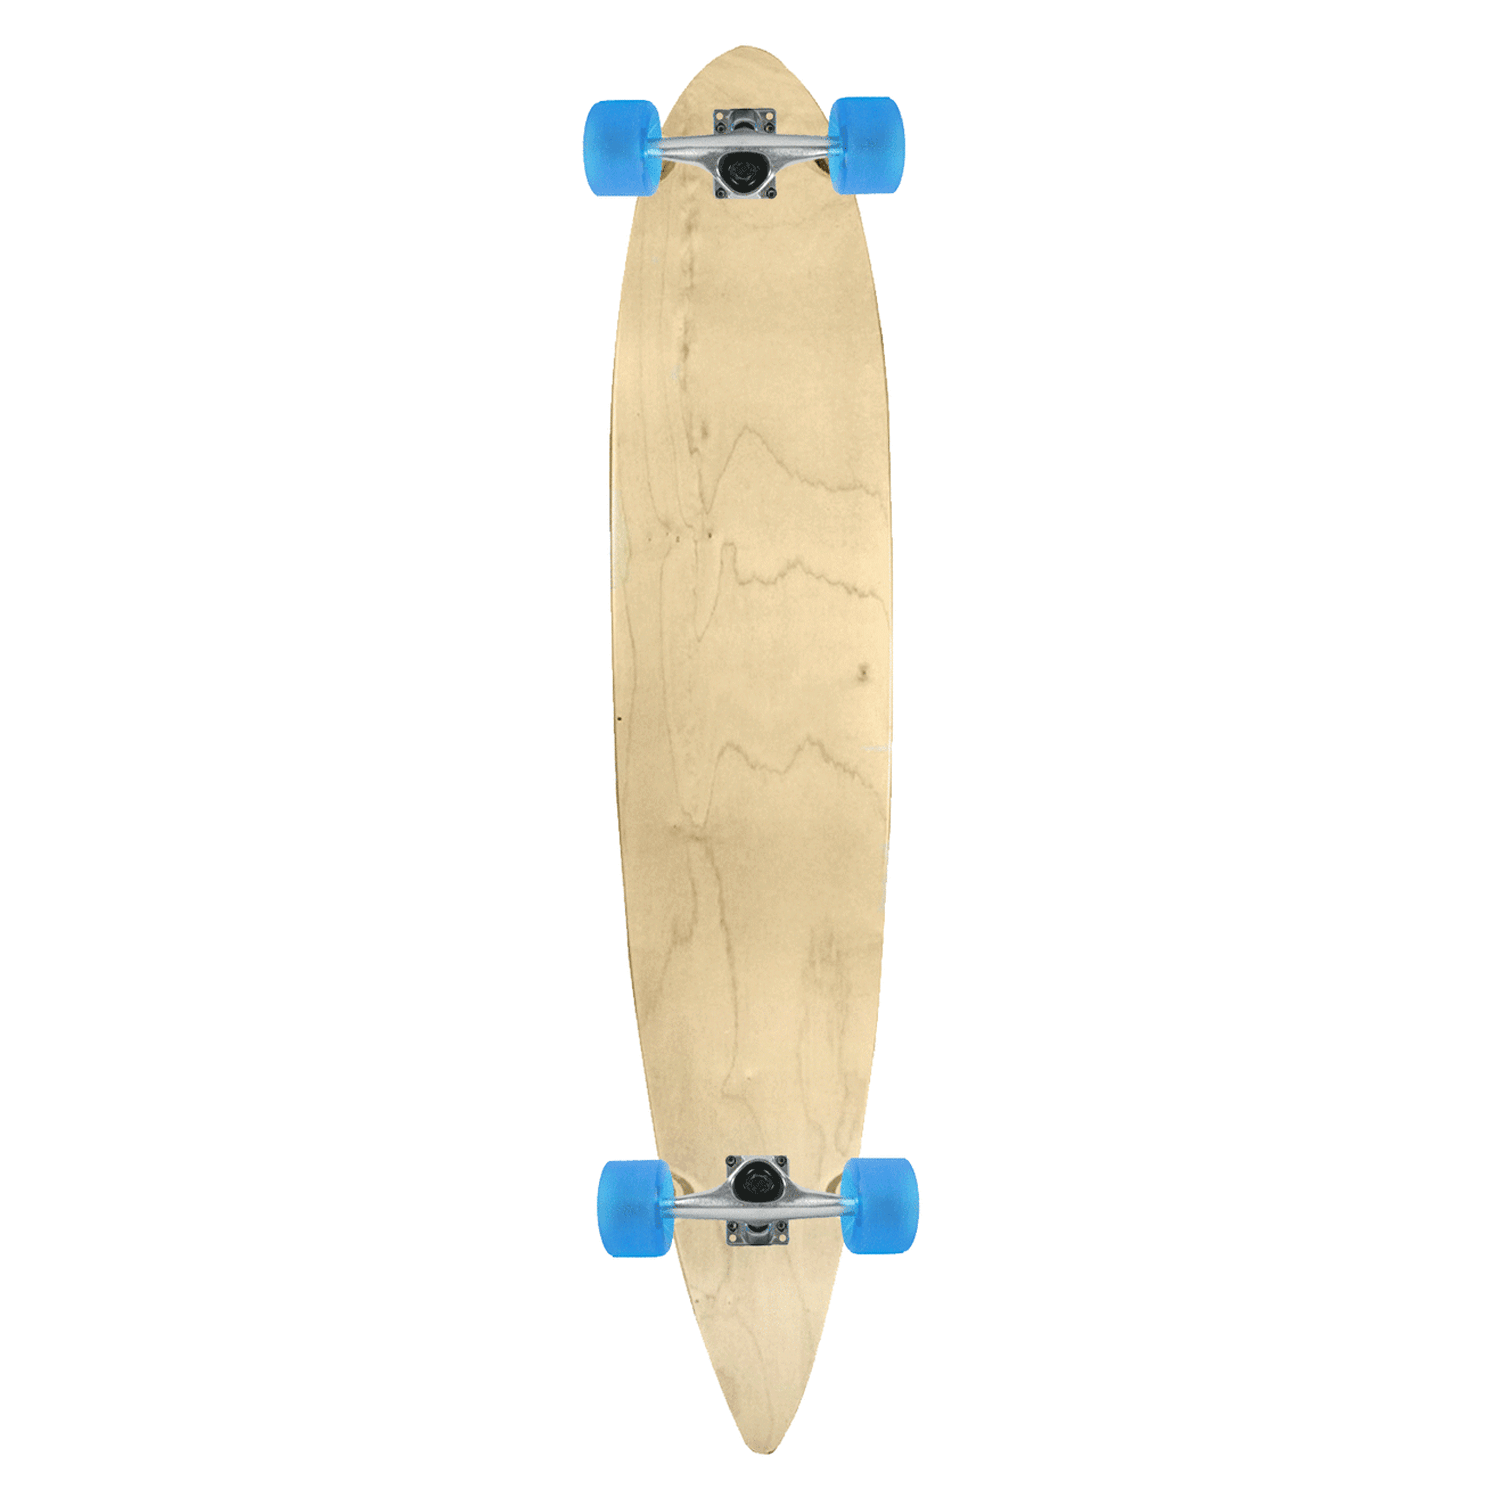 Natural PINTAIL LONGBOARD Skateboard COMPLETE 9 in x 46 in 